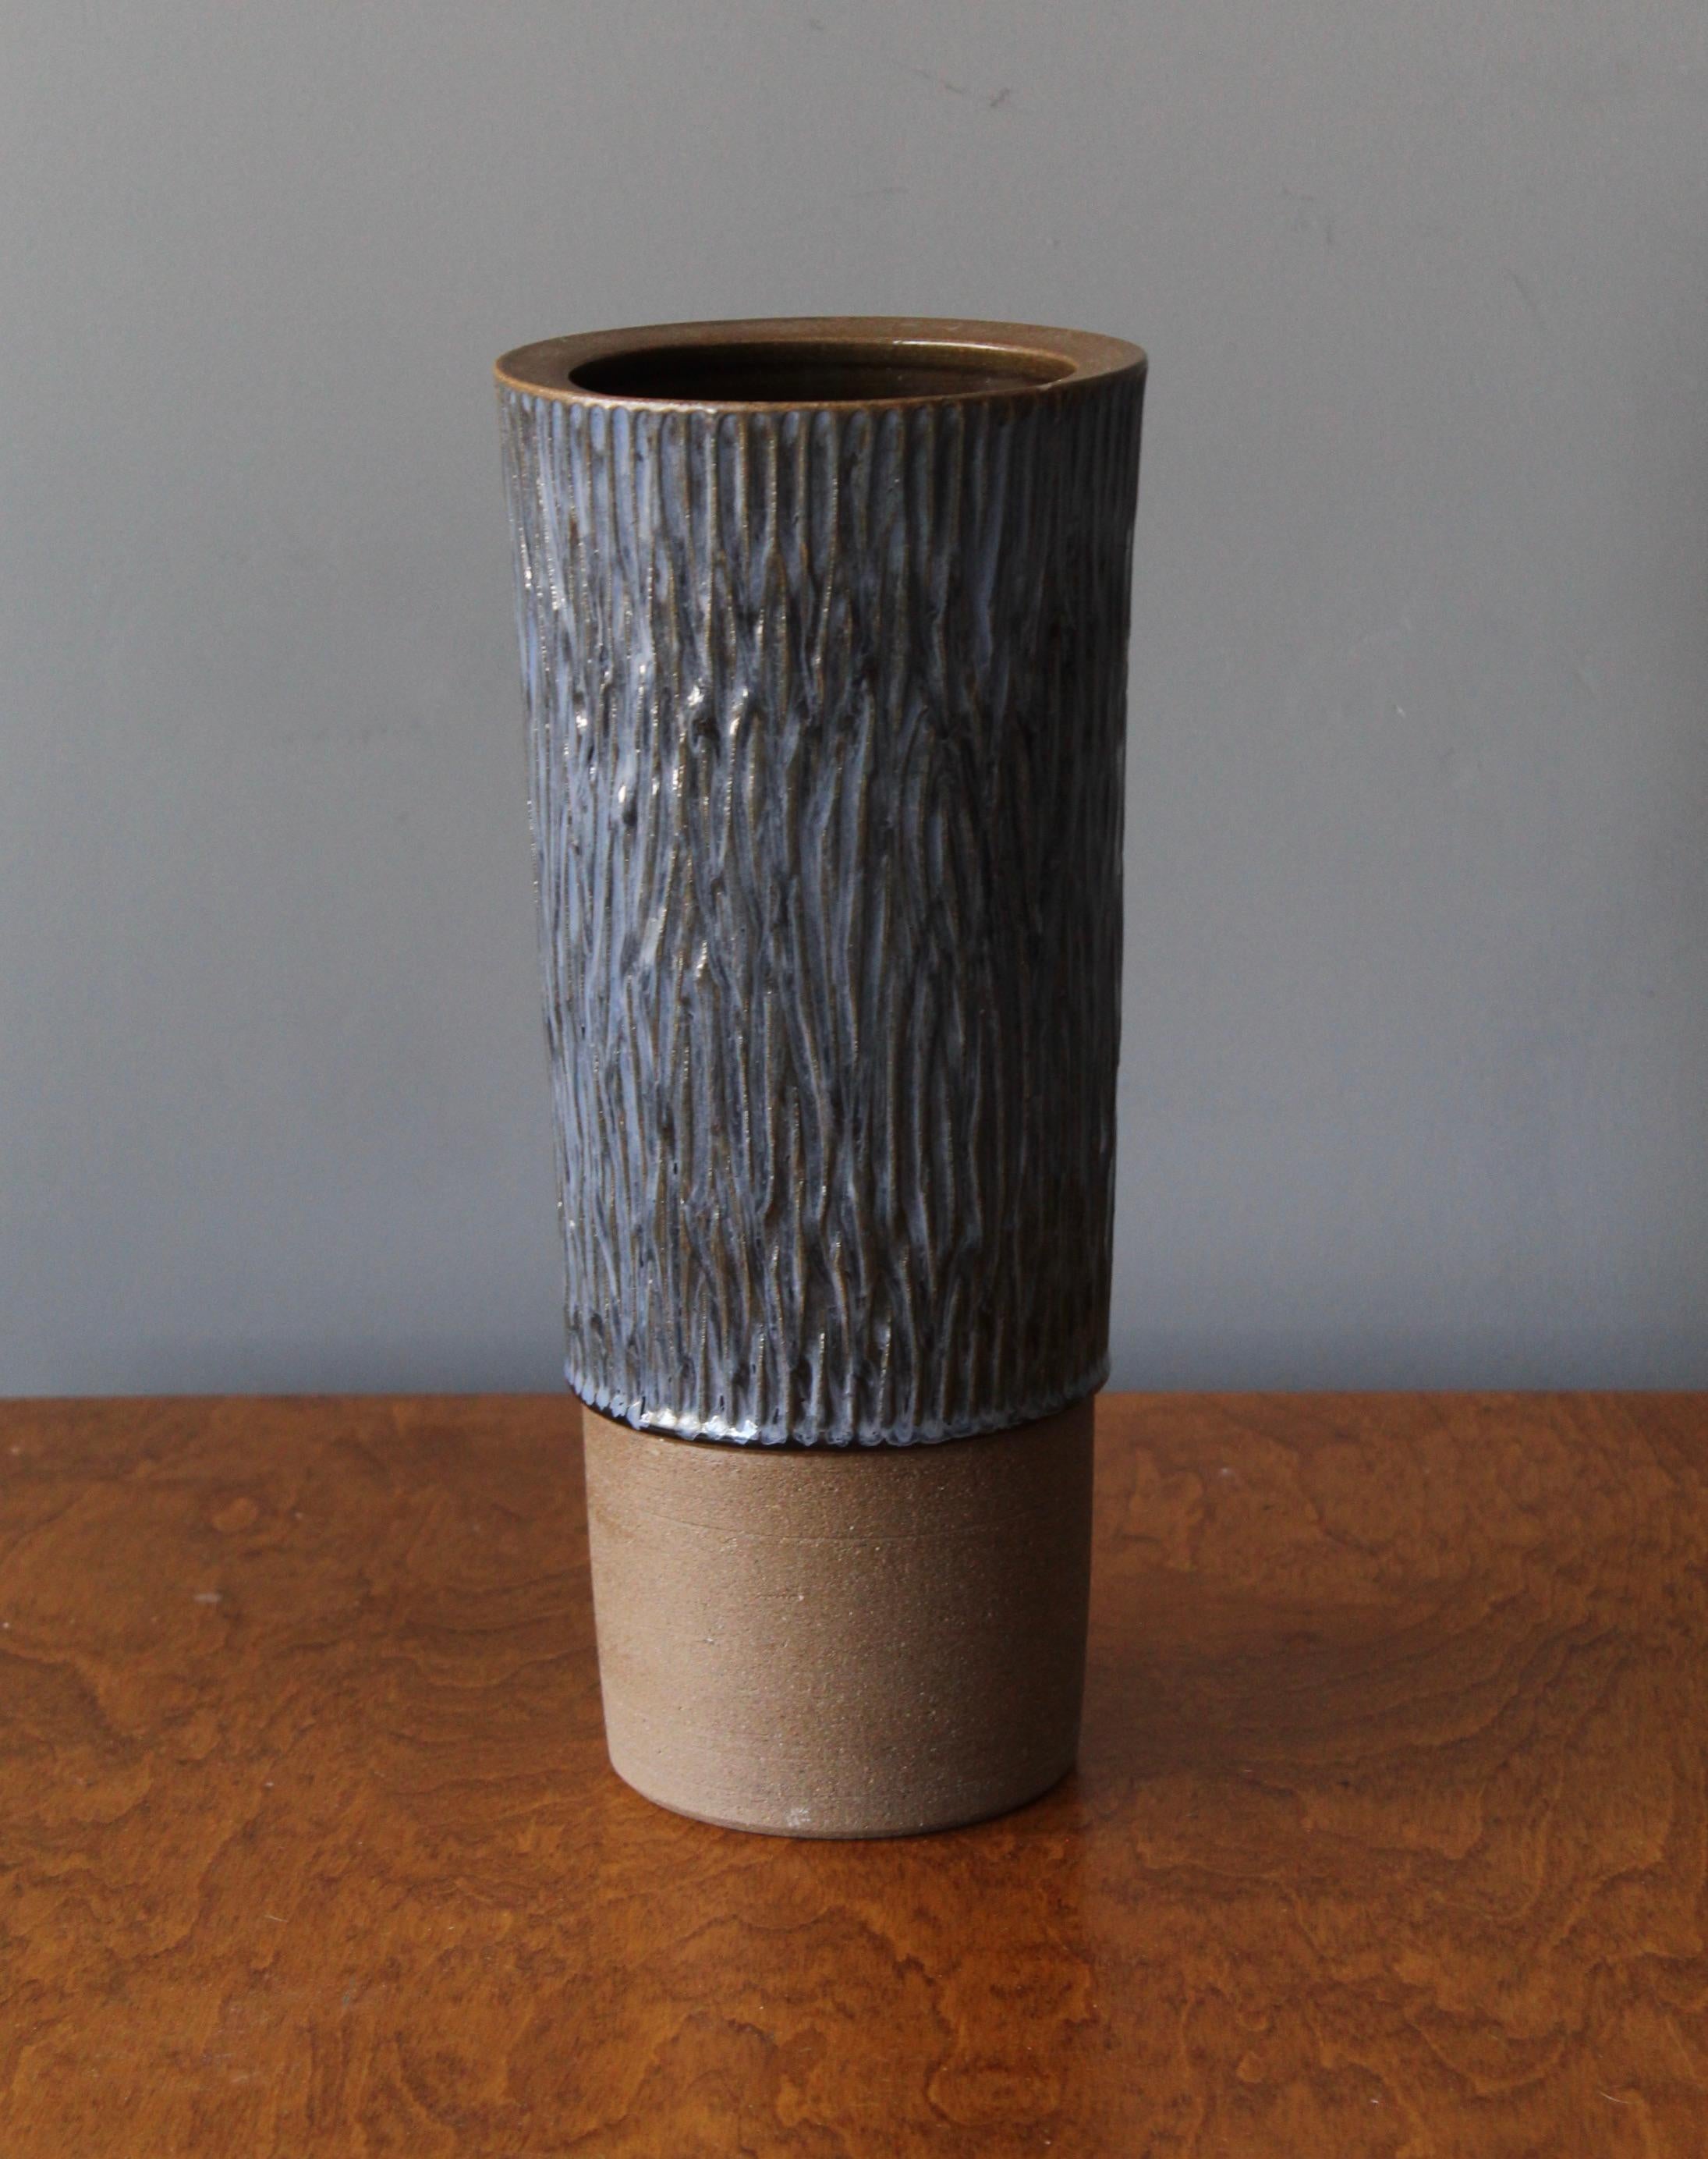 A sizable vase produced by Danish ceramicist Aage Rasmus Selsbo in his studio, Simlångsdalen, Sweden, 1960s. Features Blue glaze and subtle incised decoration. Labeled.

